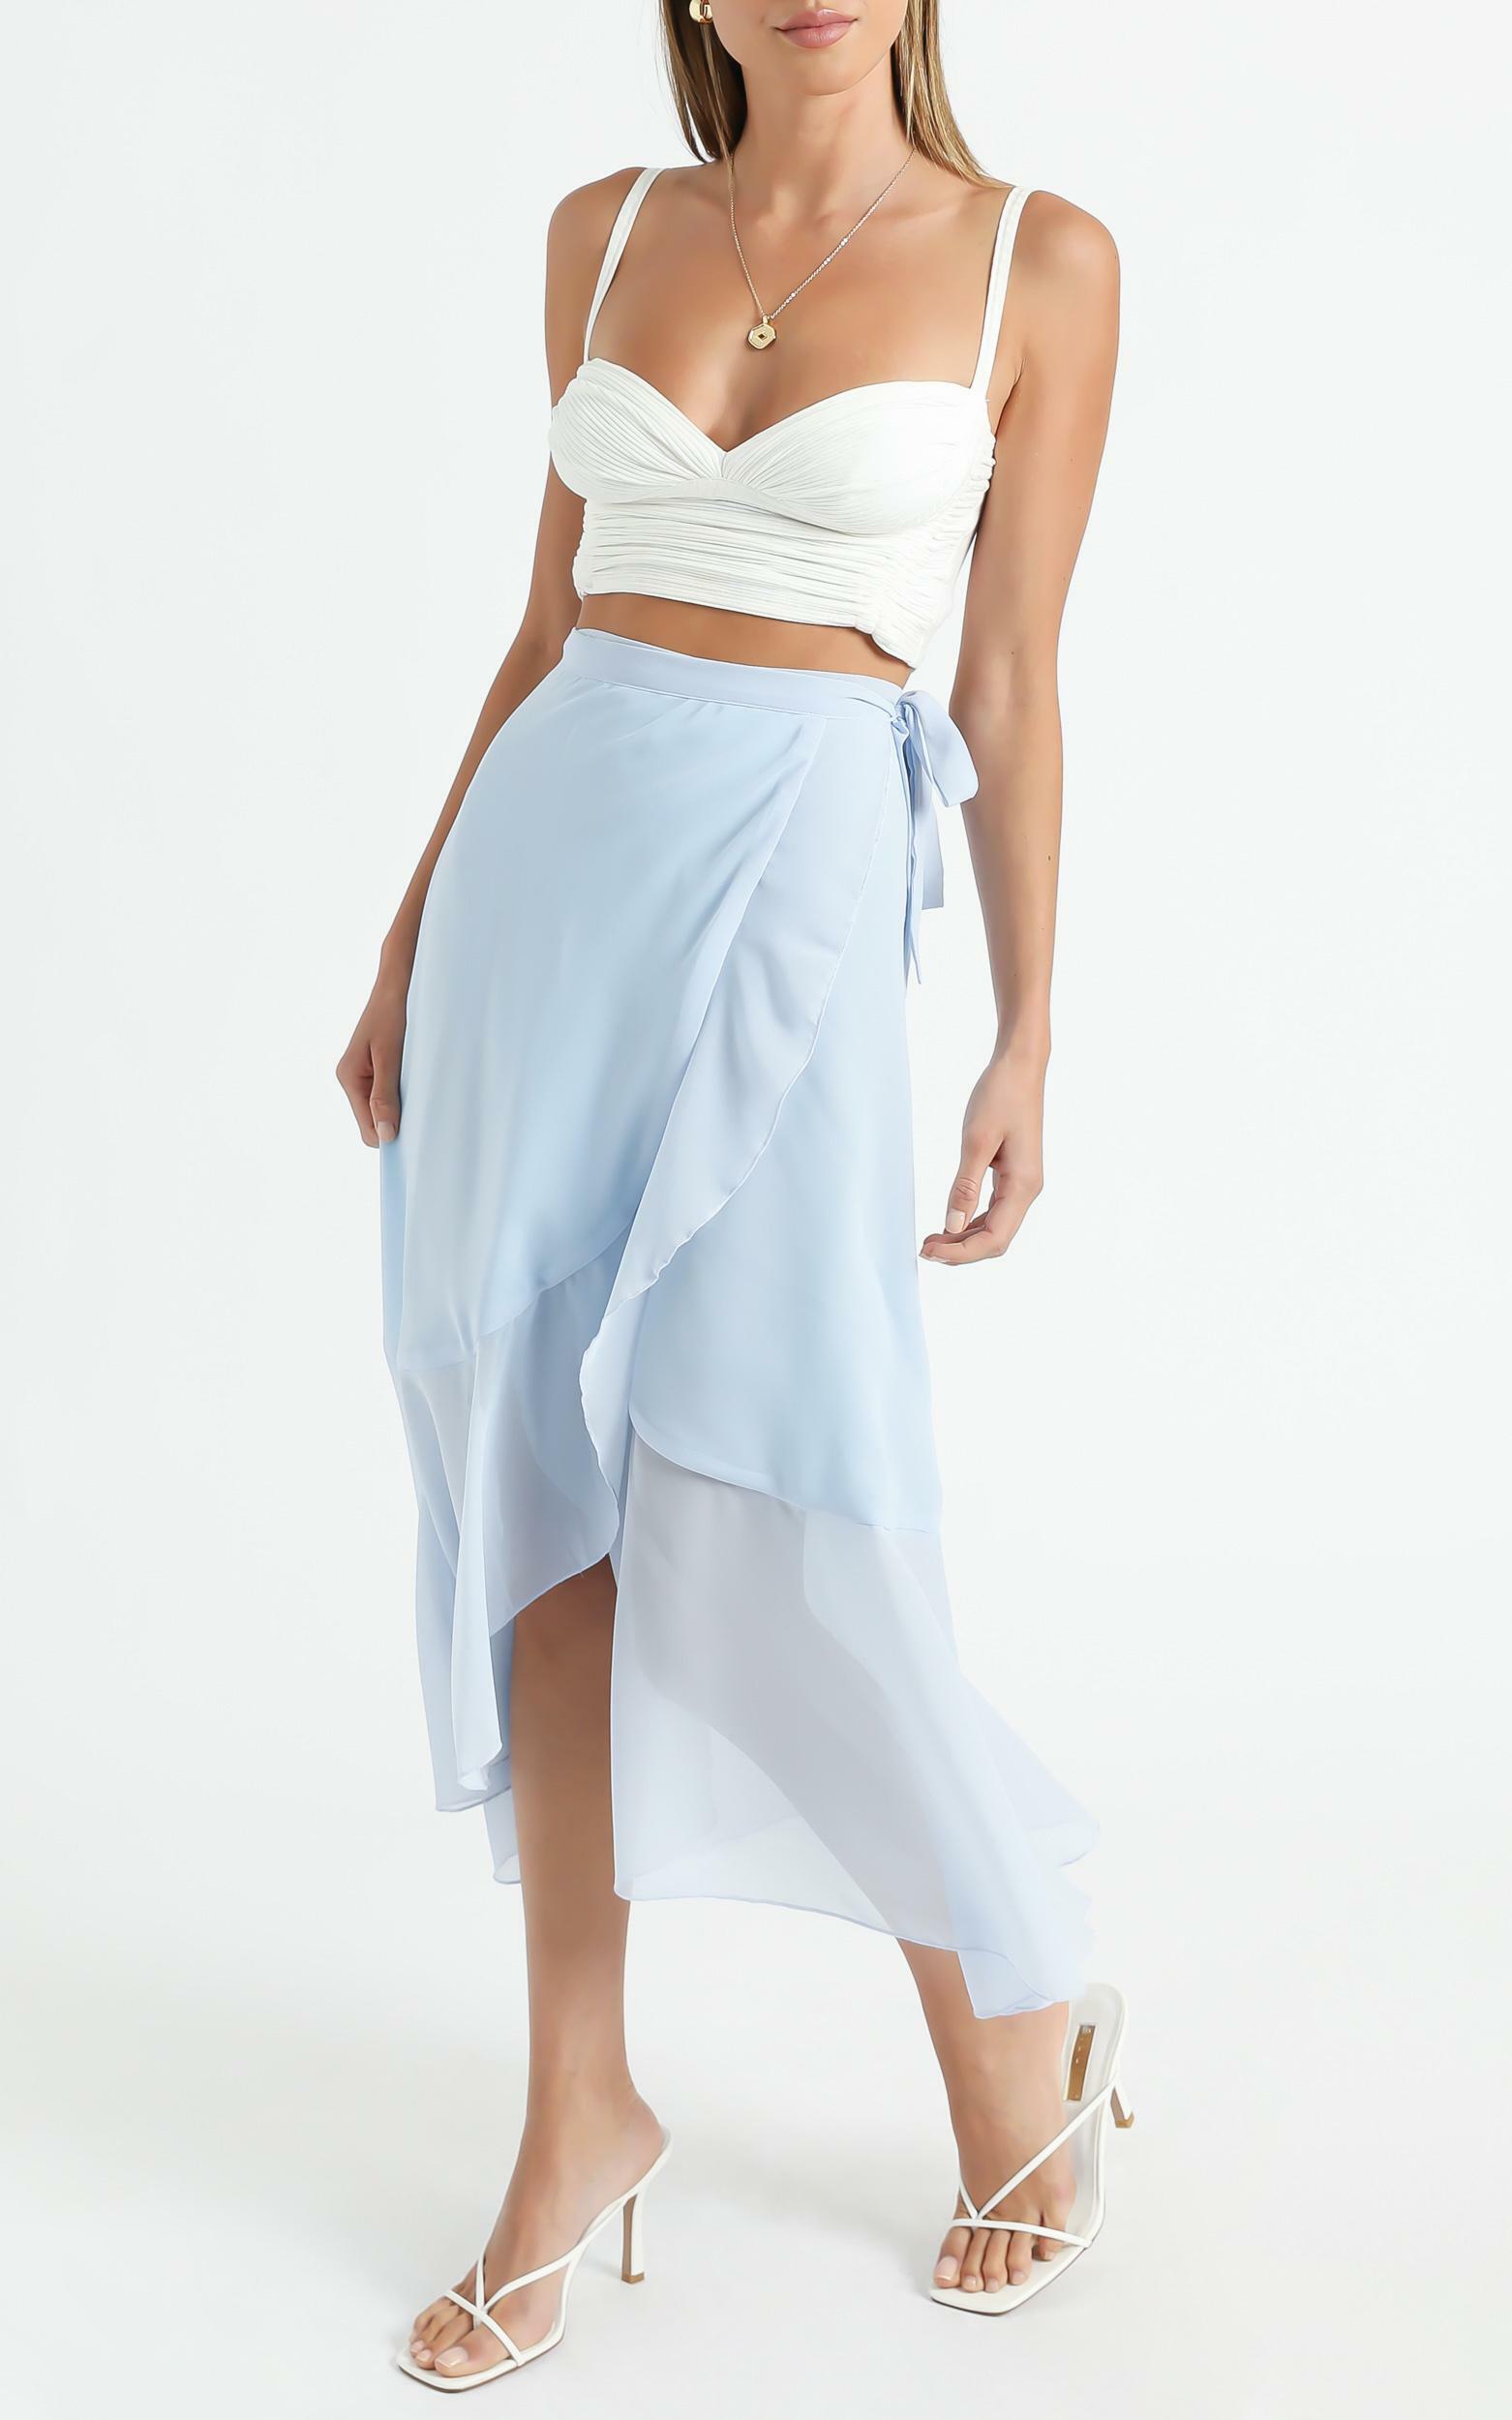 Add To The Mix Skirt in Blue - 06, BLU1, hi-res image number null